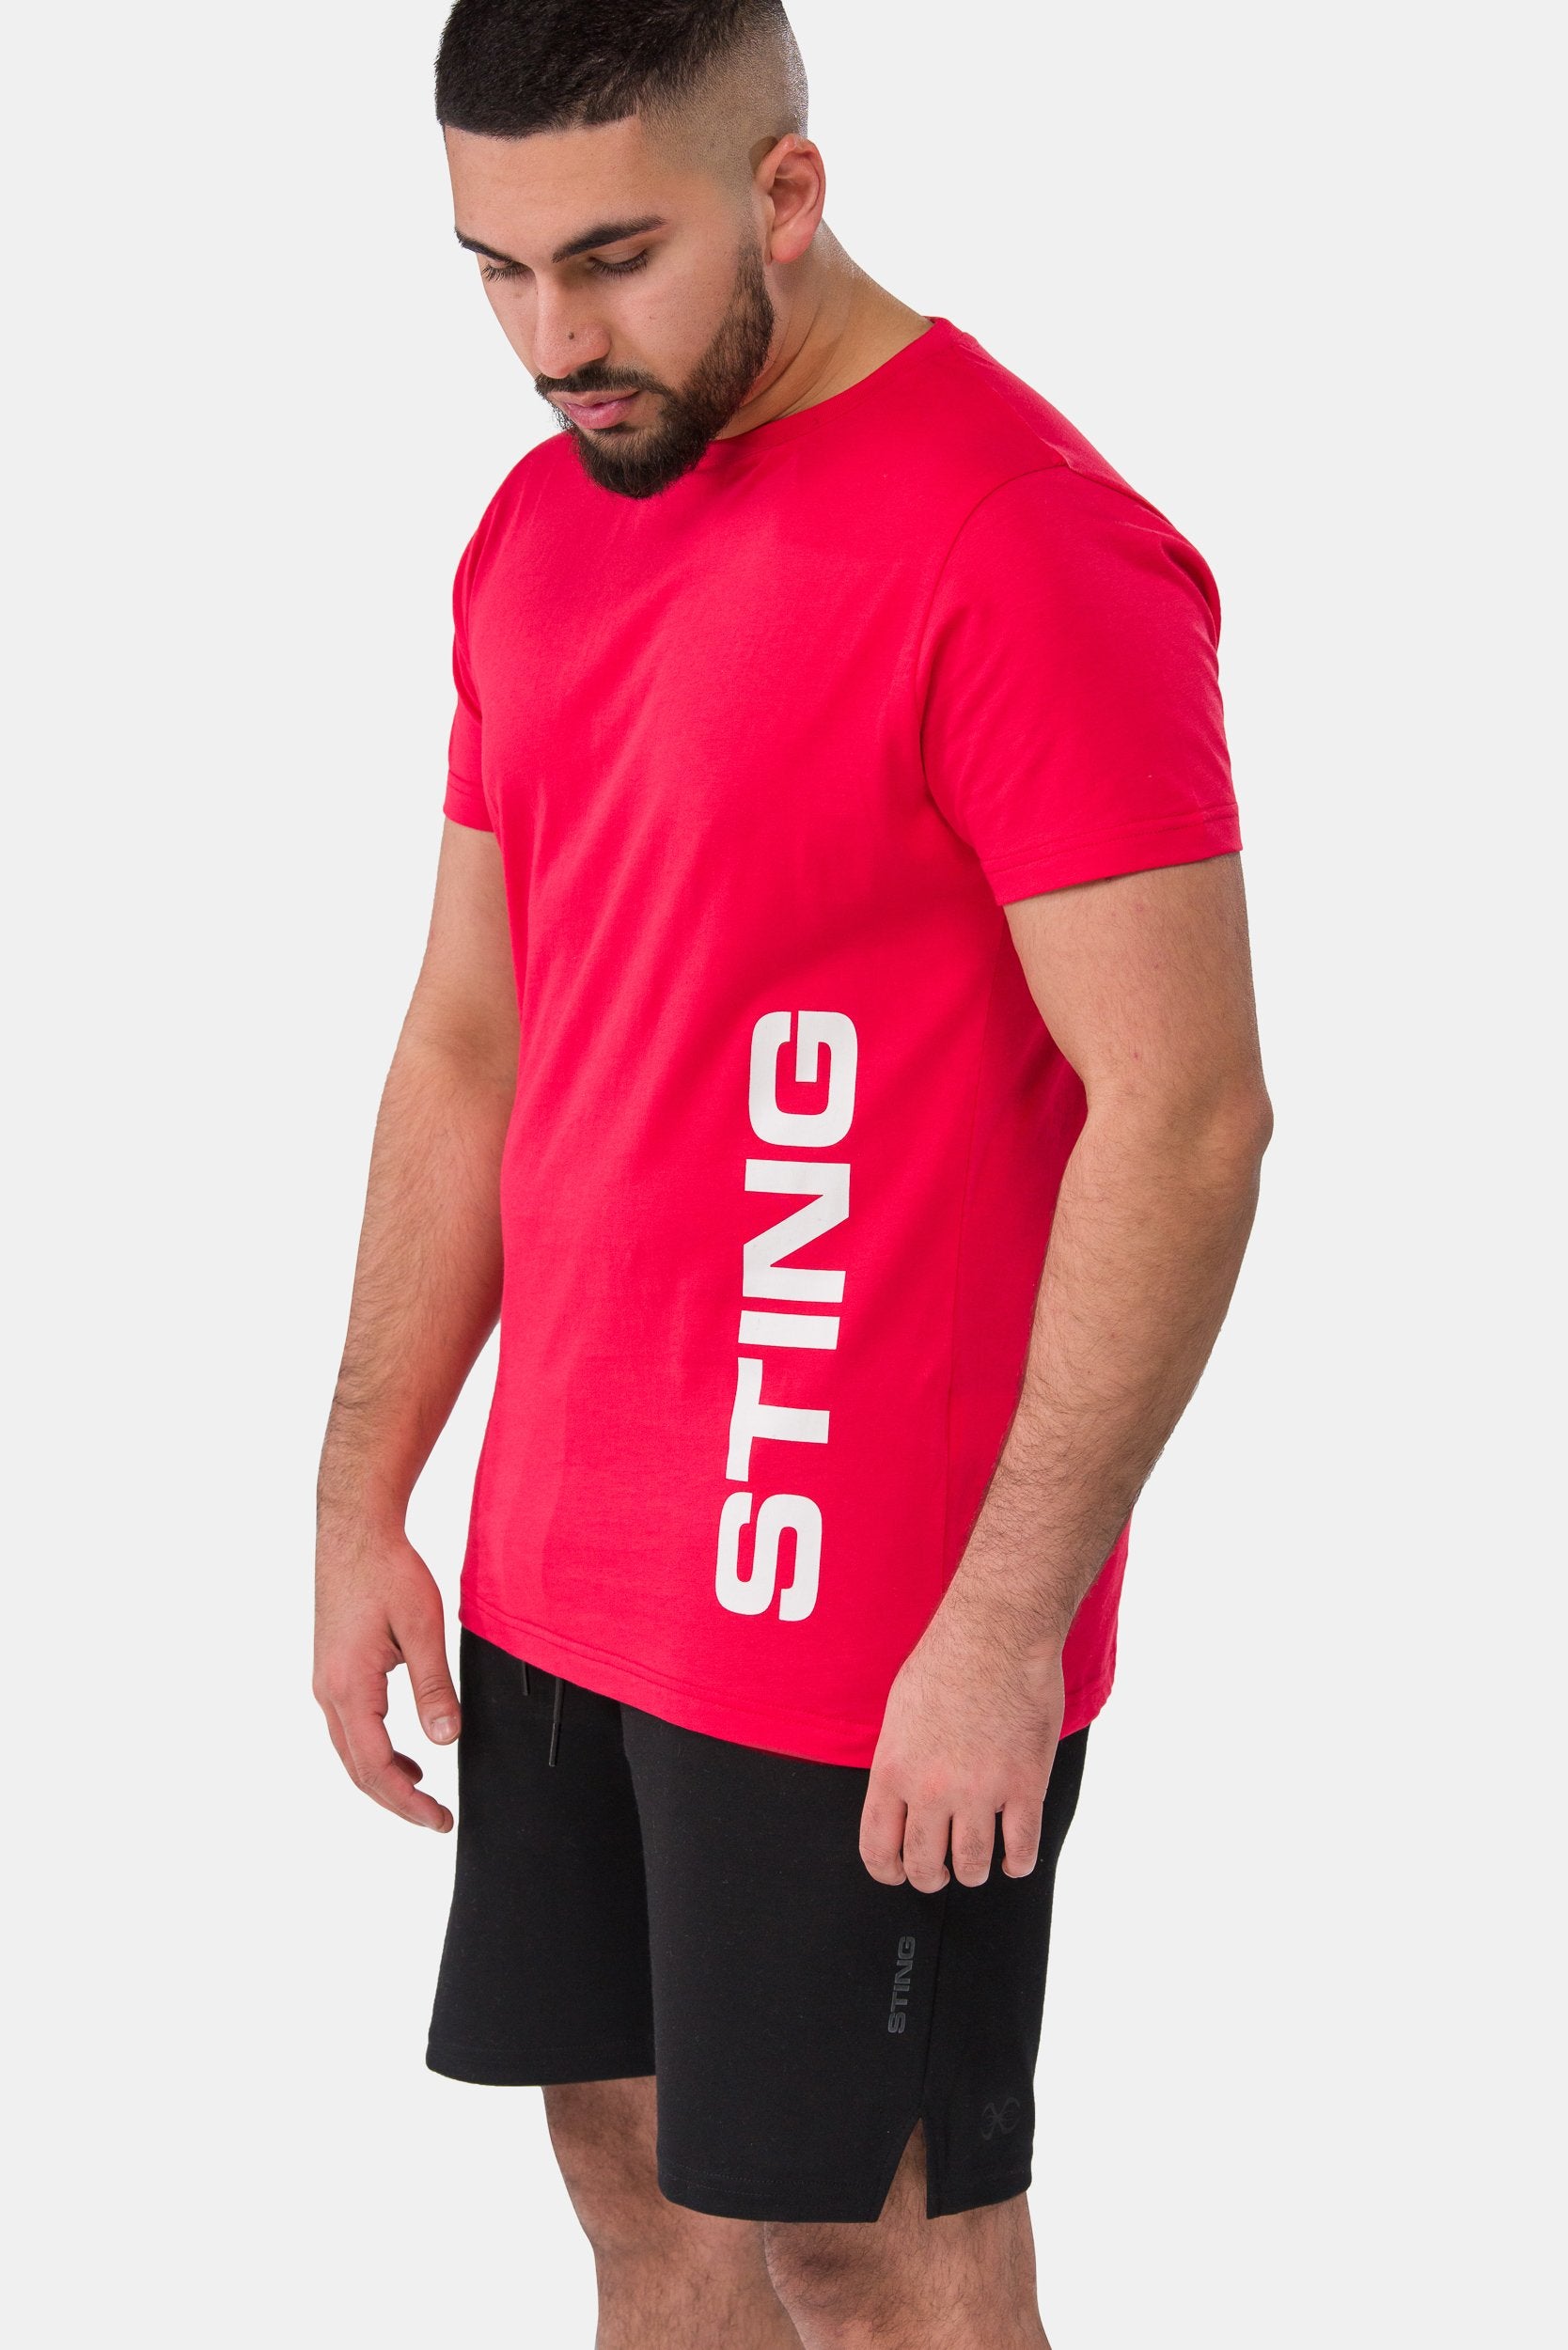 STING Mens Ultra Tee Red